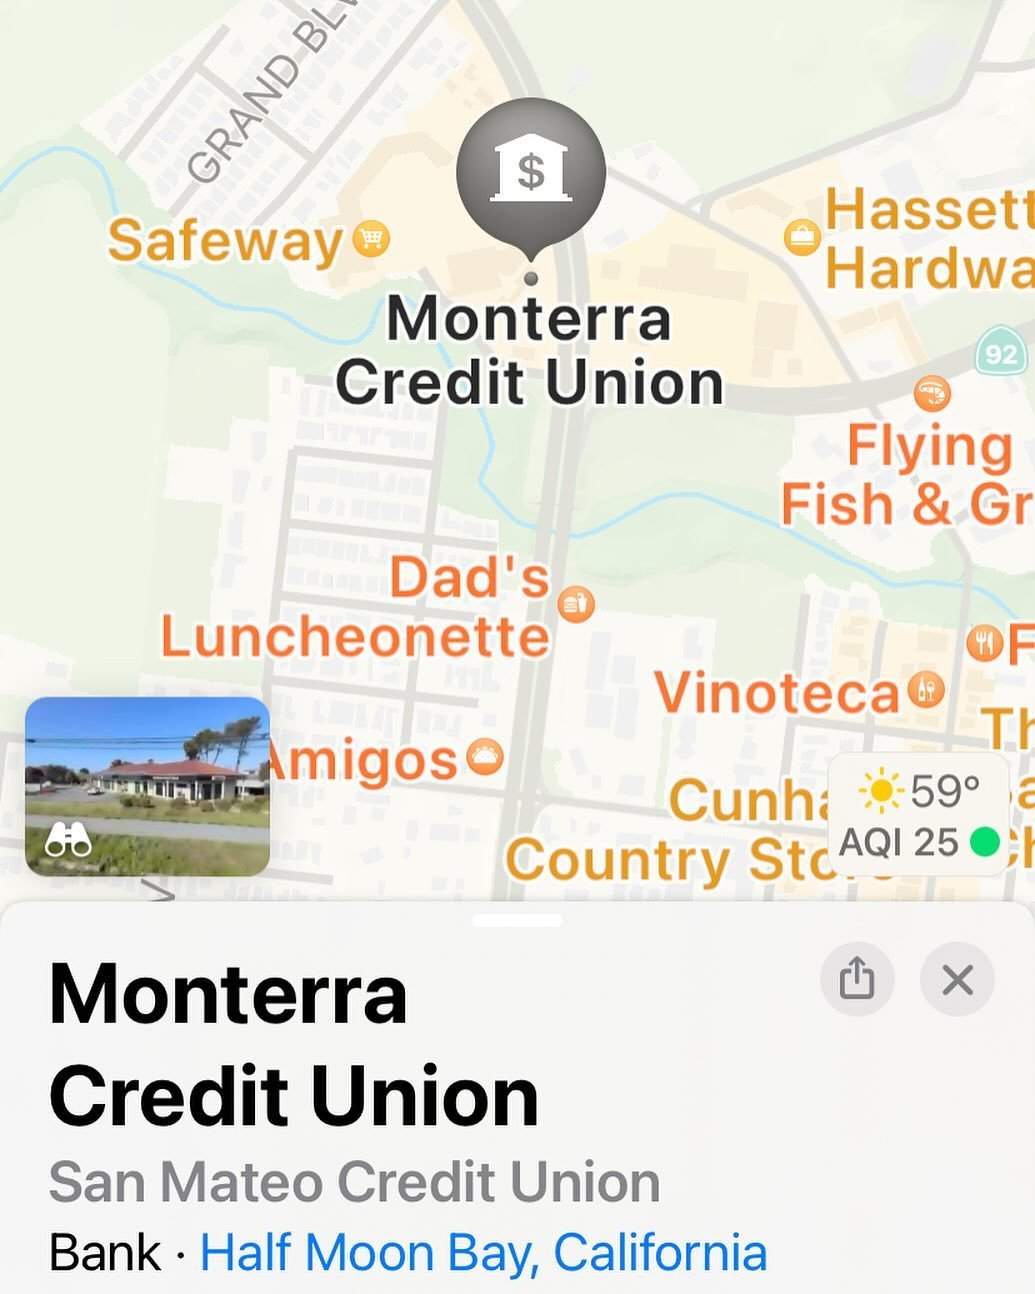 Finding the best credit union is easy. Just follow the map. 
Thanks to @monterracreditunion for sponsoring the amazing @coastsideGives day of giving. 
Consider donating to us, @BeachBreakEntertainmentFilmFestival's Drive to bring well told stories an